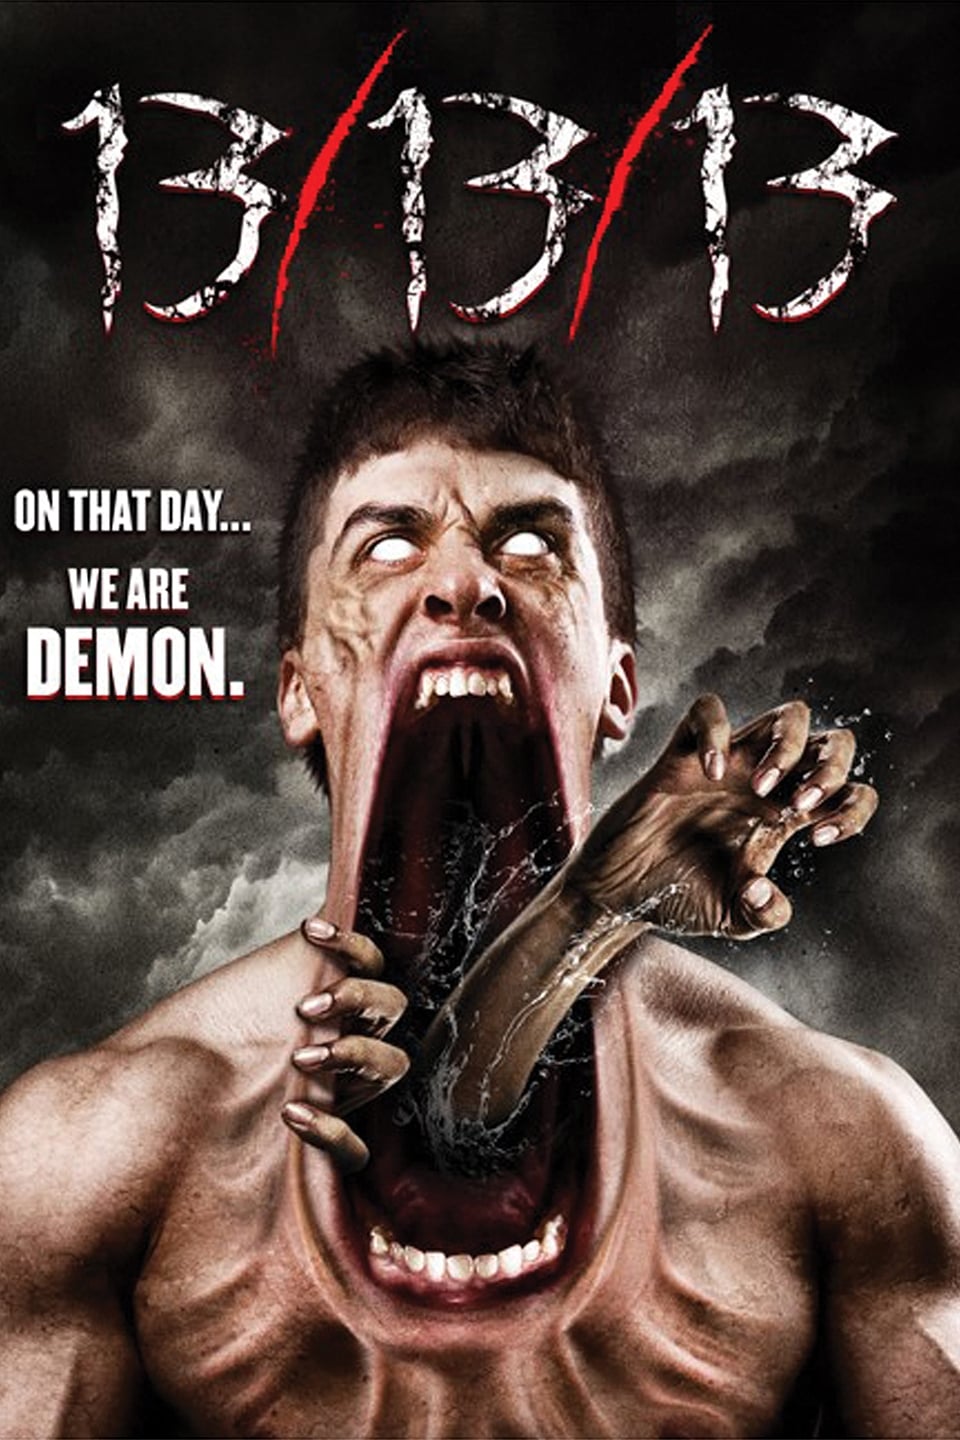 Day of the Demons - 13/13/13 (2013)